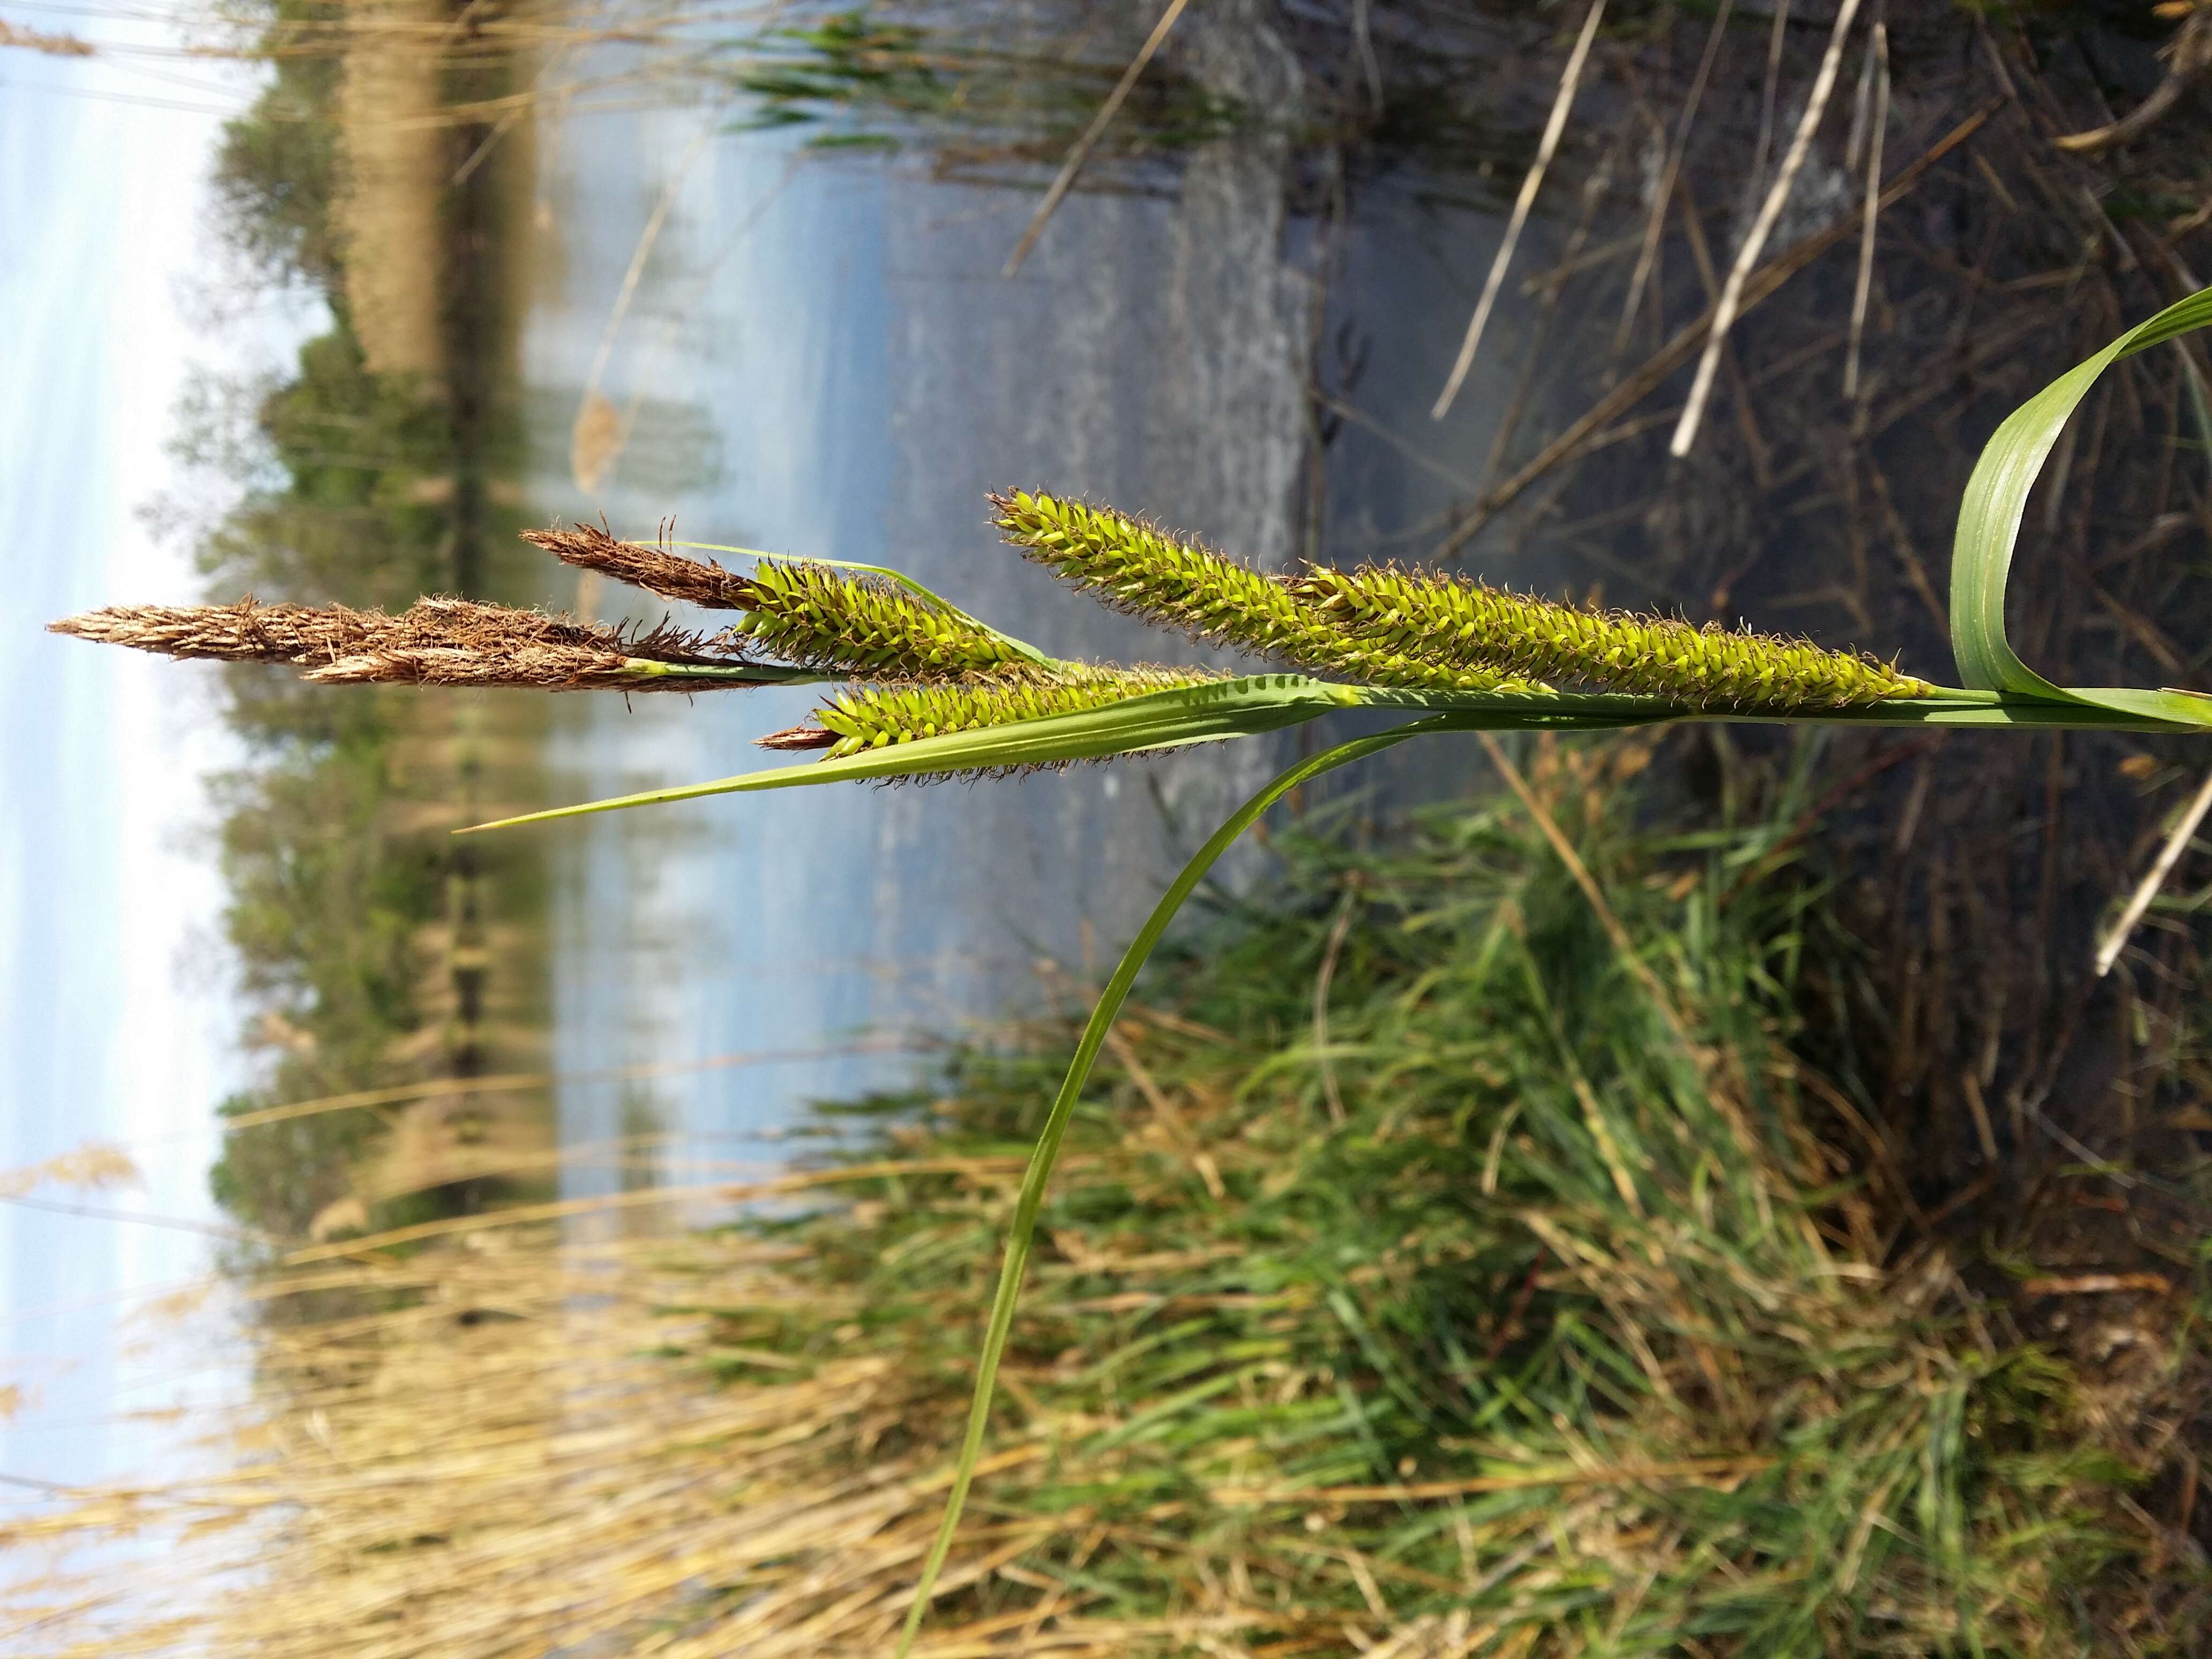 Image of Greater Pond-Sedge